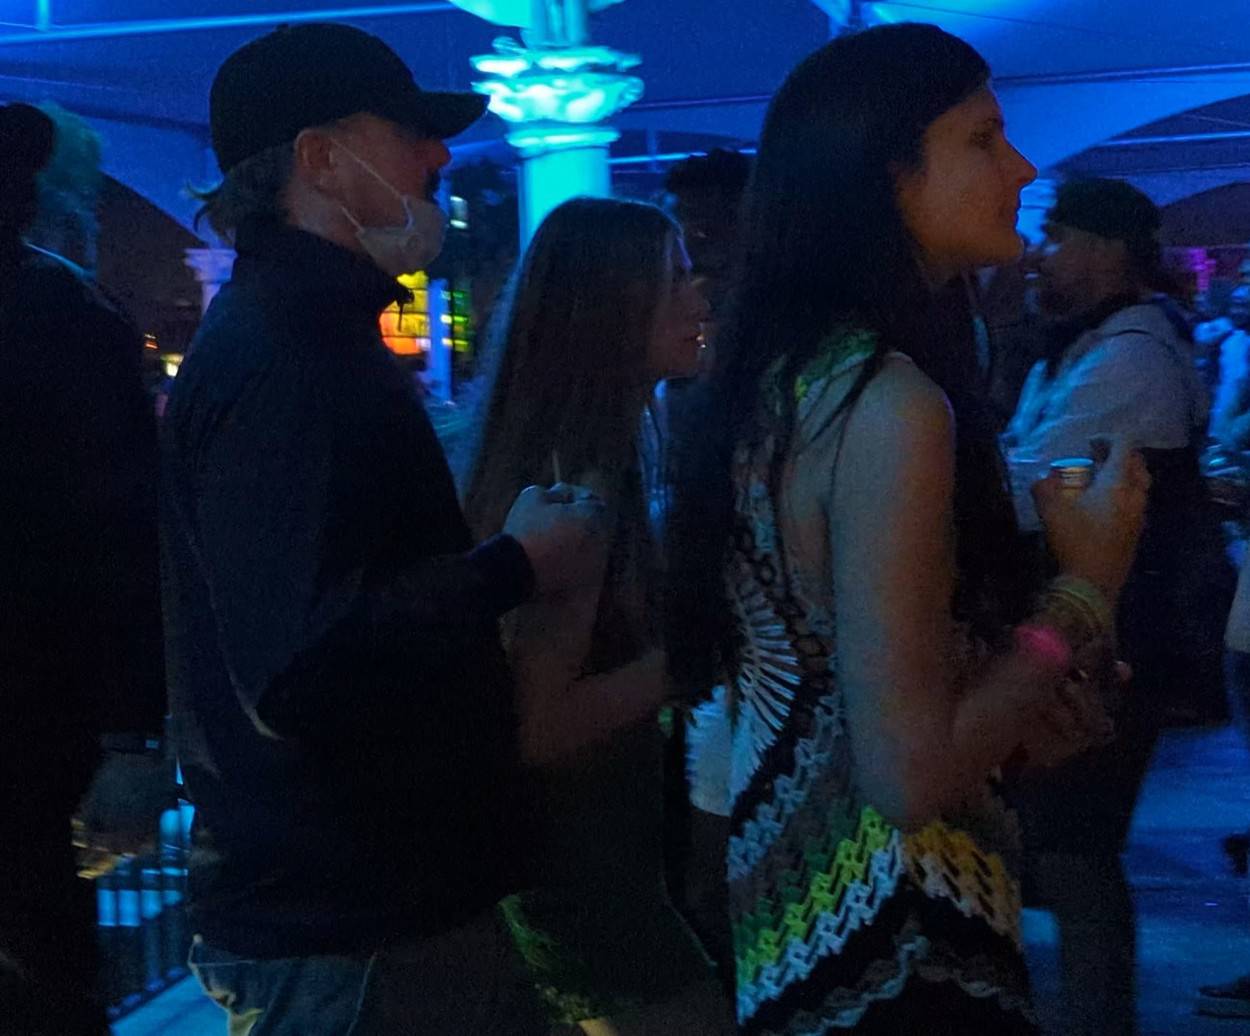 Leonardo DiCaprio parties with a group of girls at his VIP table at Coachella Festival